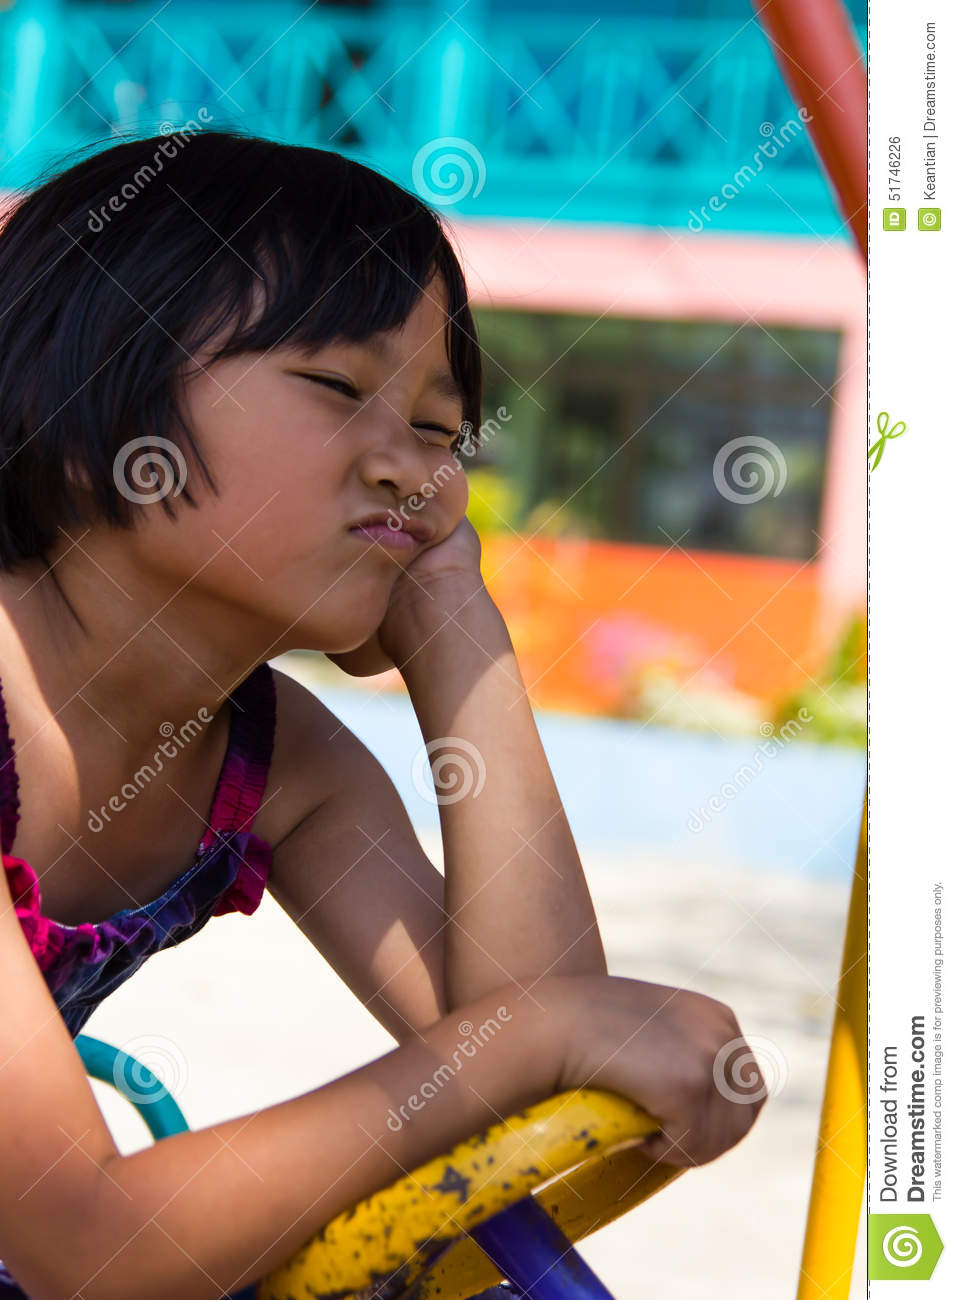 Girl Sitting On An Upset Scowl Driving School Playground In One Of